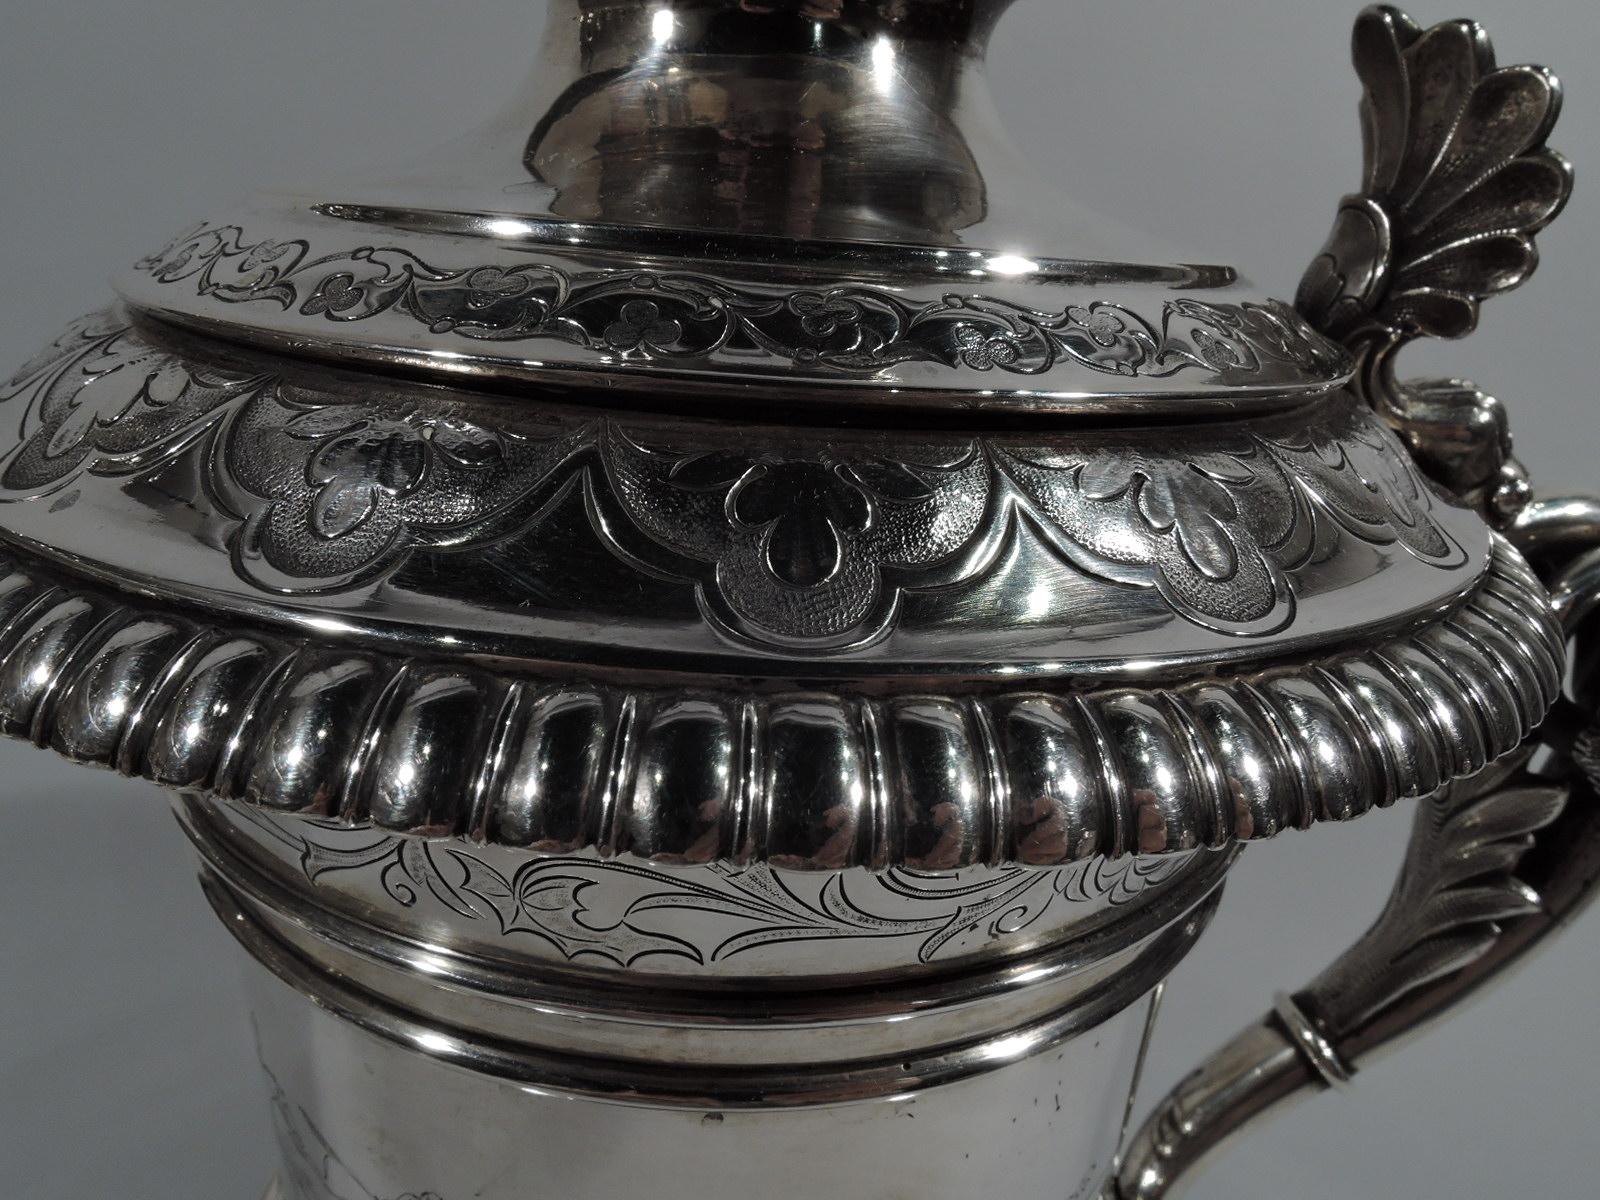 Neoclassical Revival Antique Danish Silver Horse Race Tankard with Royal Presentation